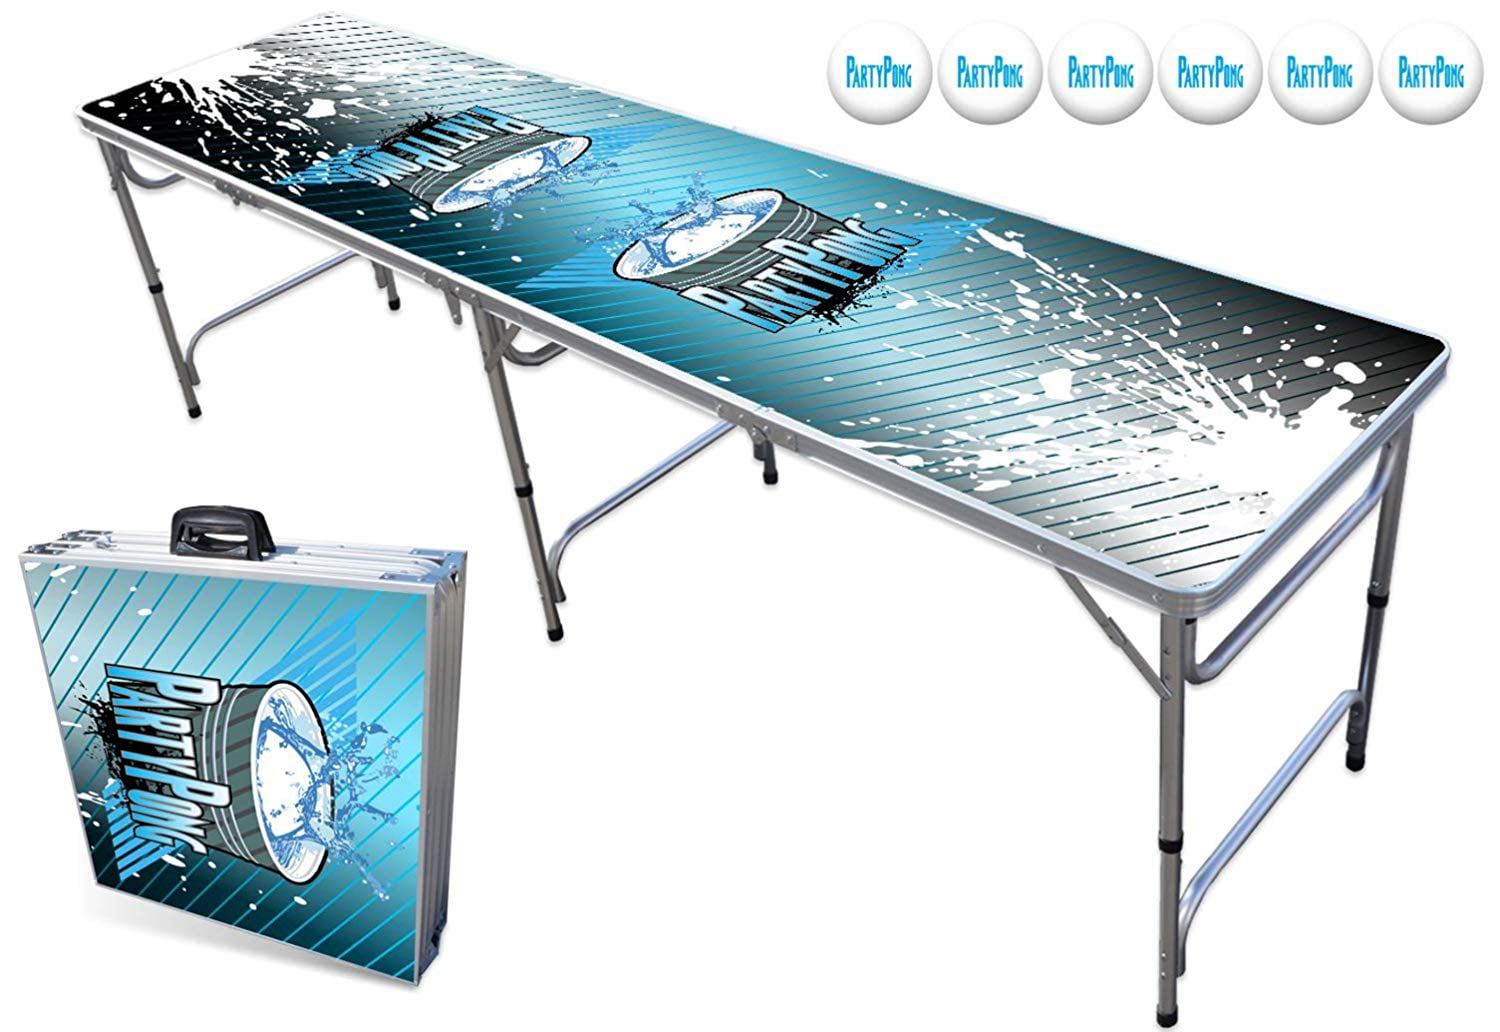 Details about   Beer Pong Table Game Table 8' Folding Drinking Game Party w/ Led Lights Blue Red